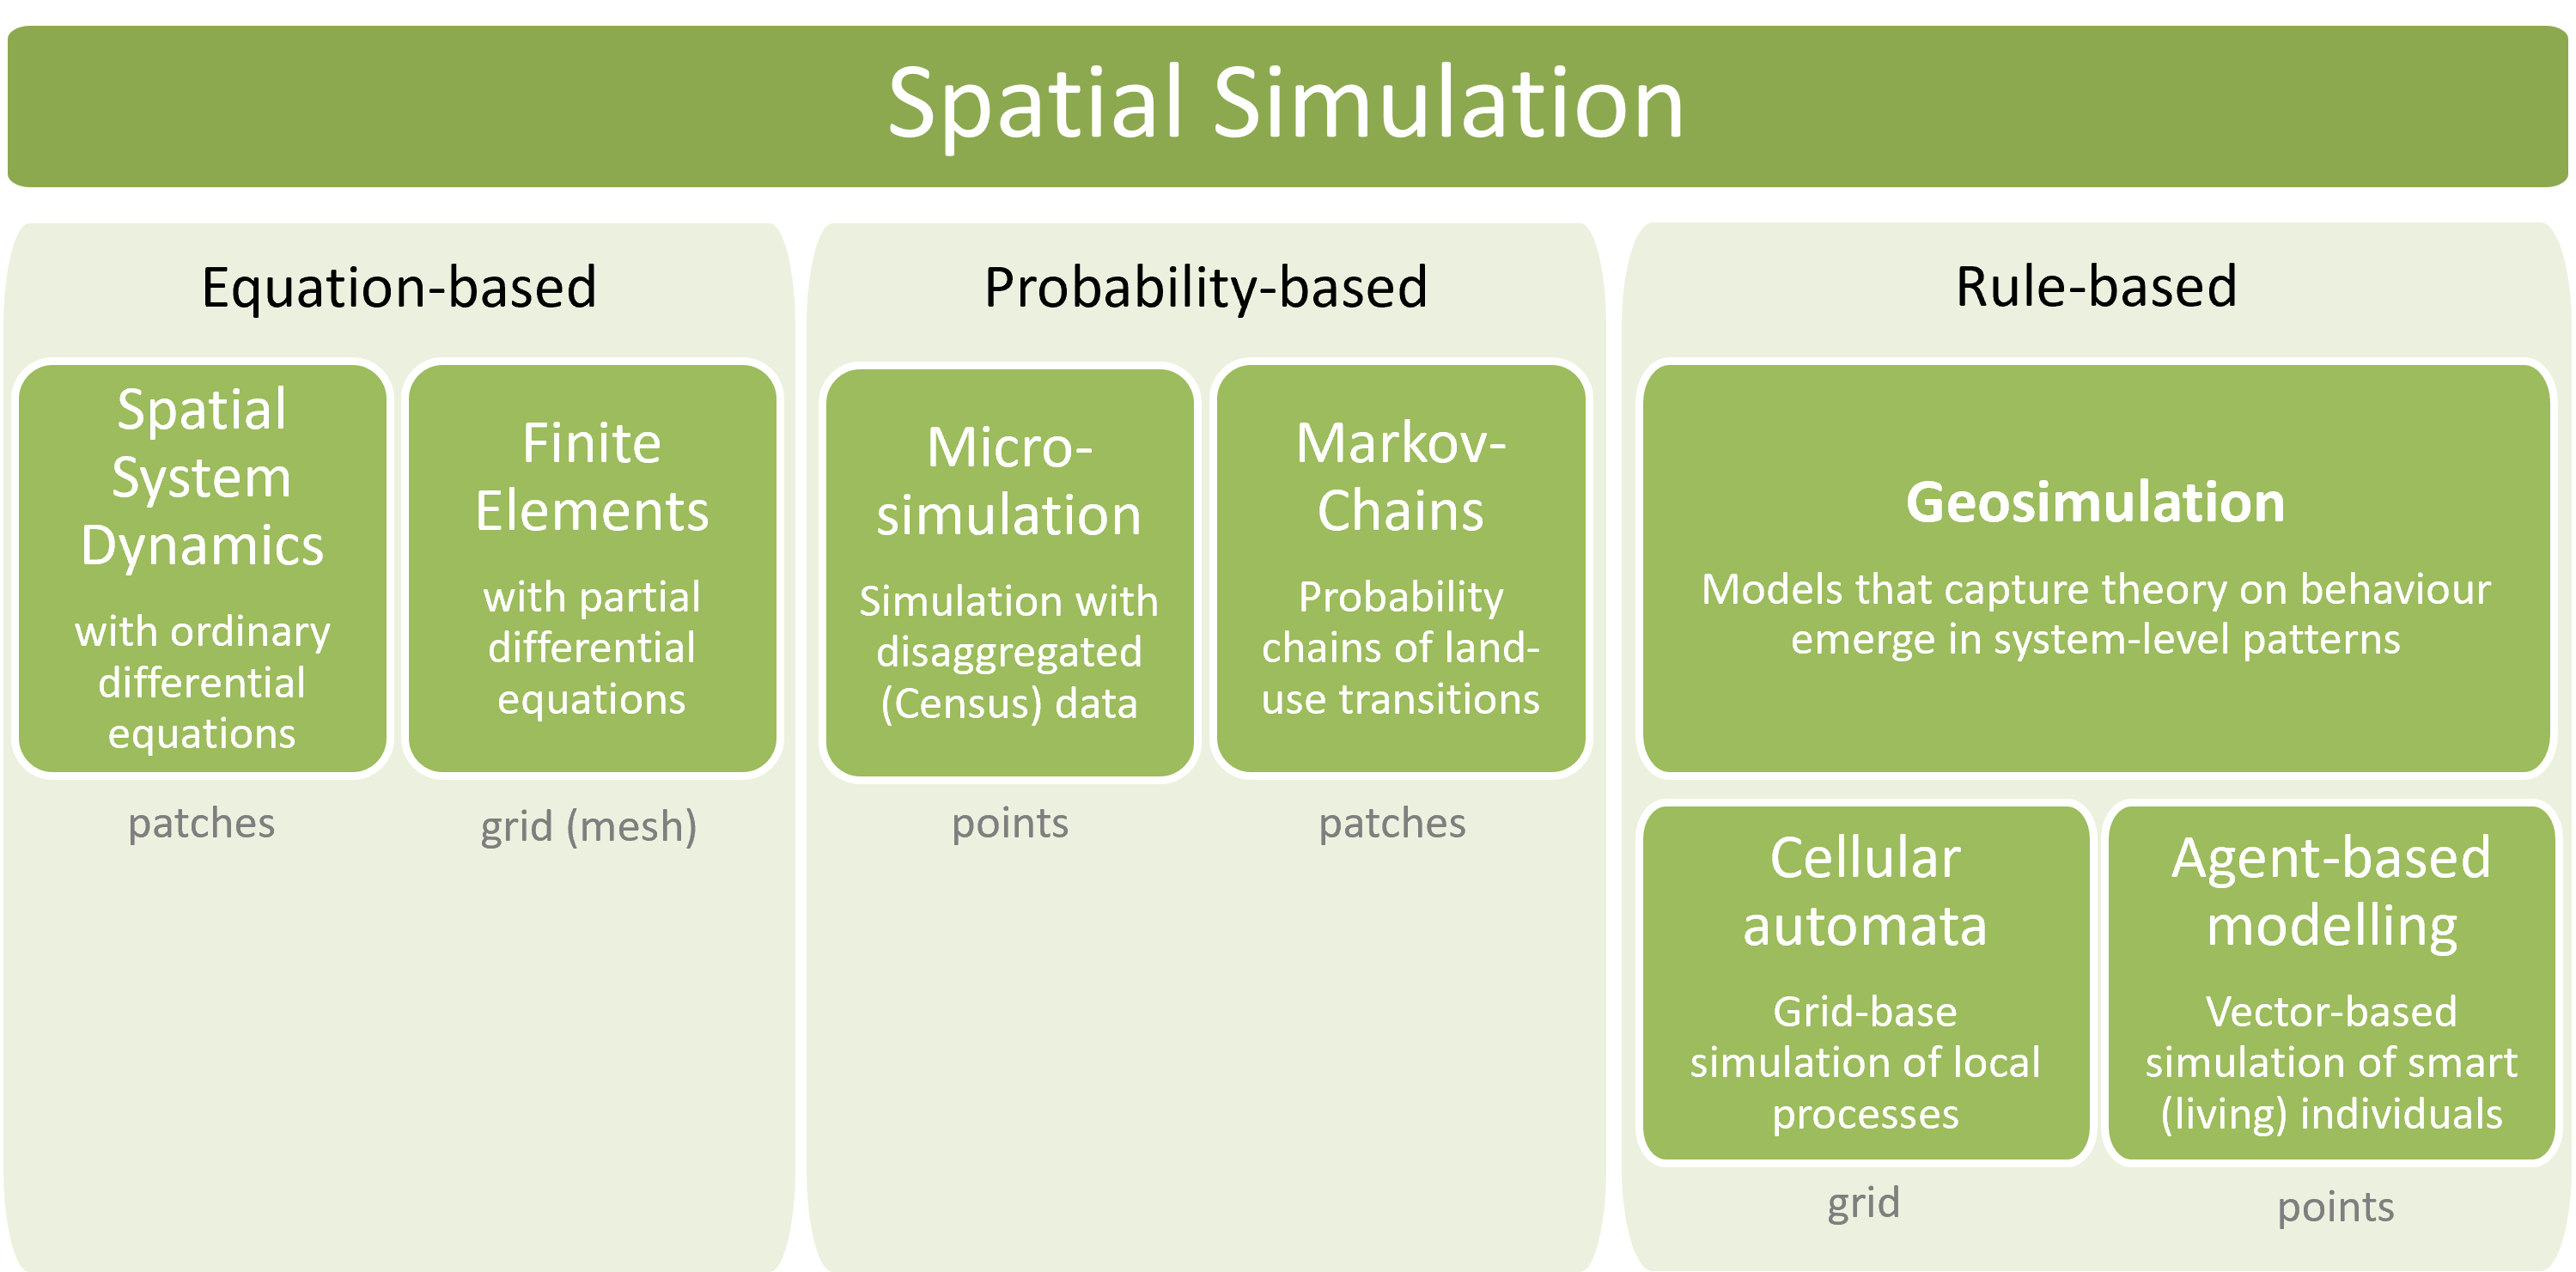 Overview of spatially explicit simulation methods.